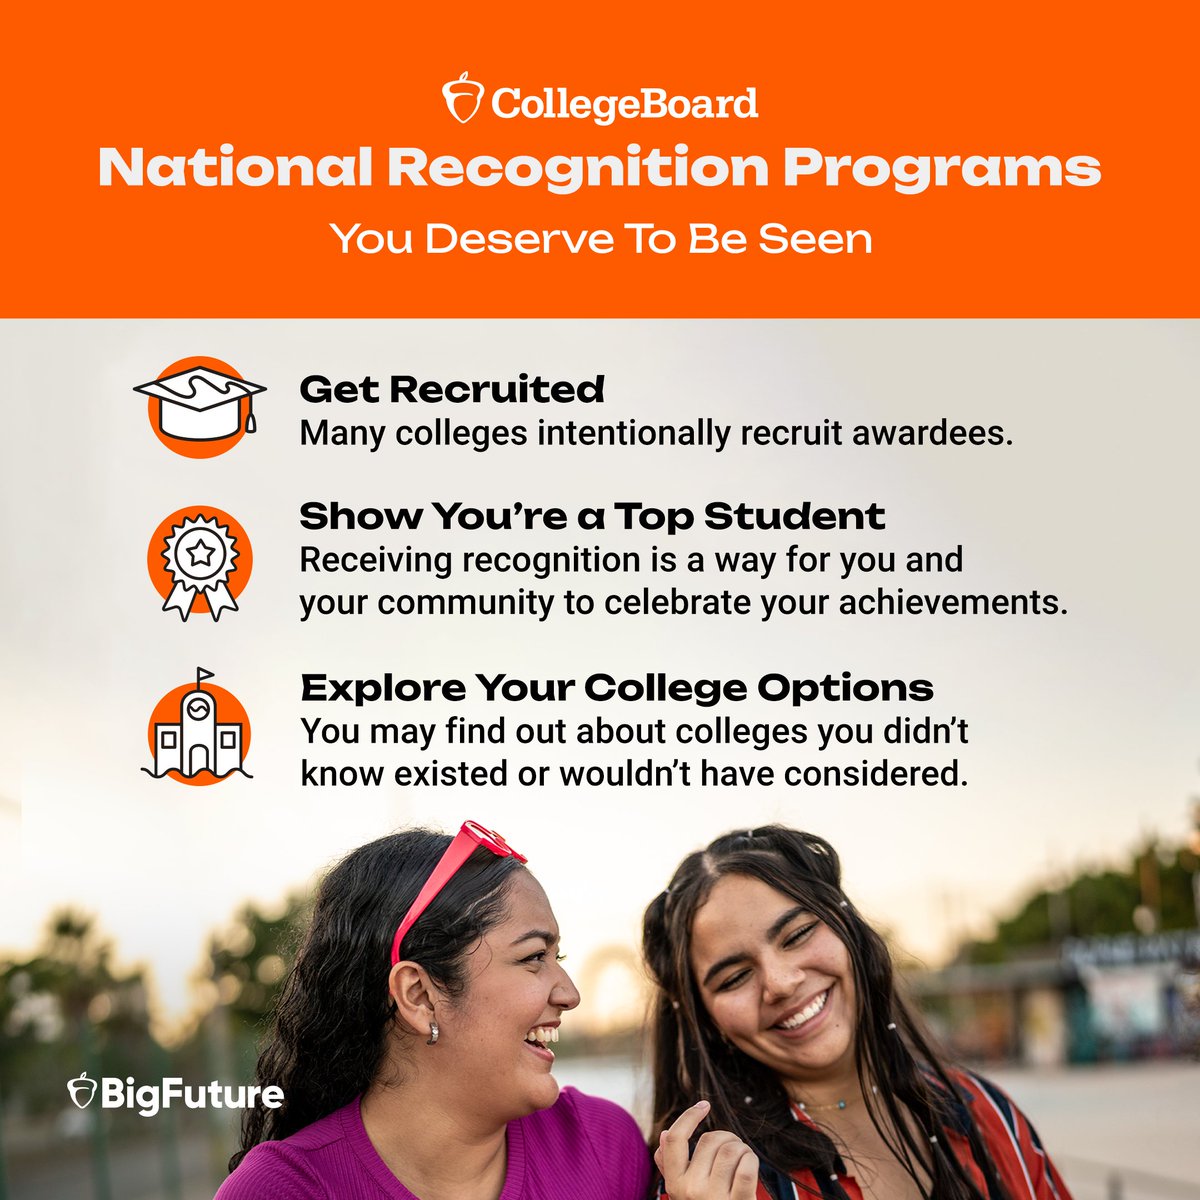 Elevate your future with The College Board National Recognition Program! When you qualify, you can: 🌟Get recruited by colleges 🌟Earn academic acclaim 🌟Explore diverse colleges Check your eligibility now on #BigFuture: spr.ly/6013w7Bk9 #NationalRecognitionProgram